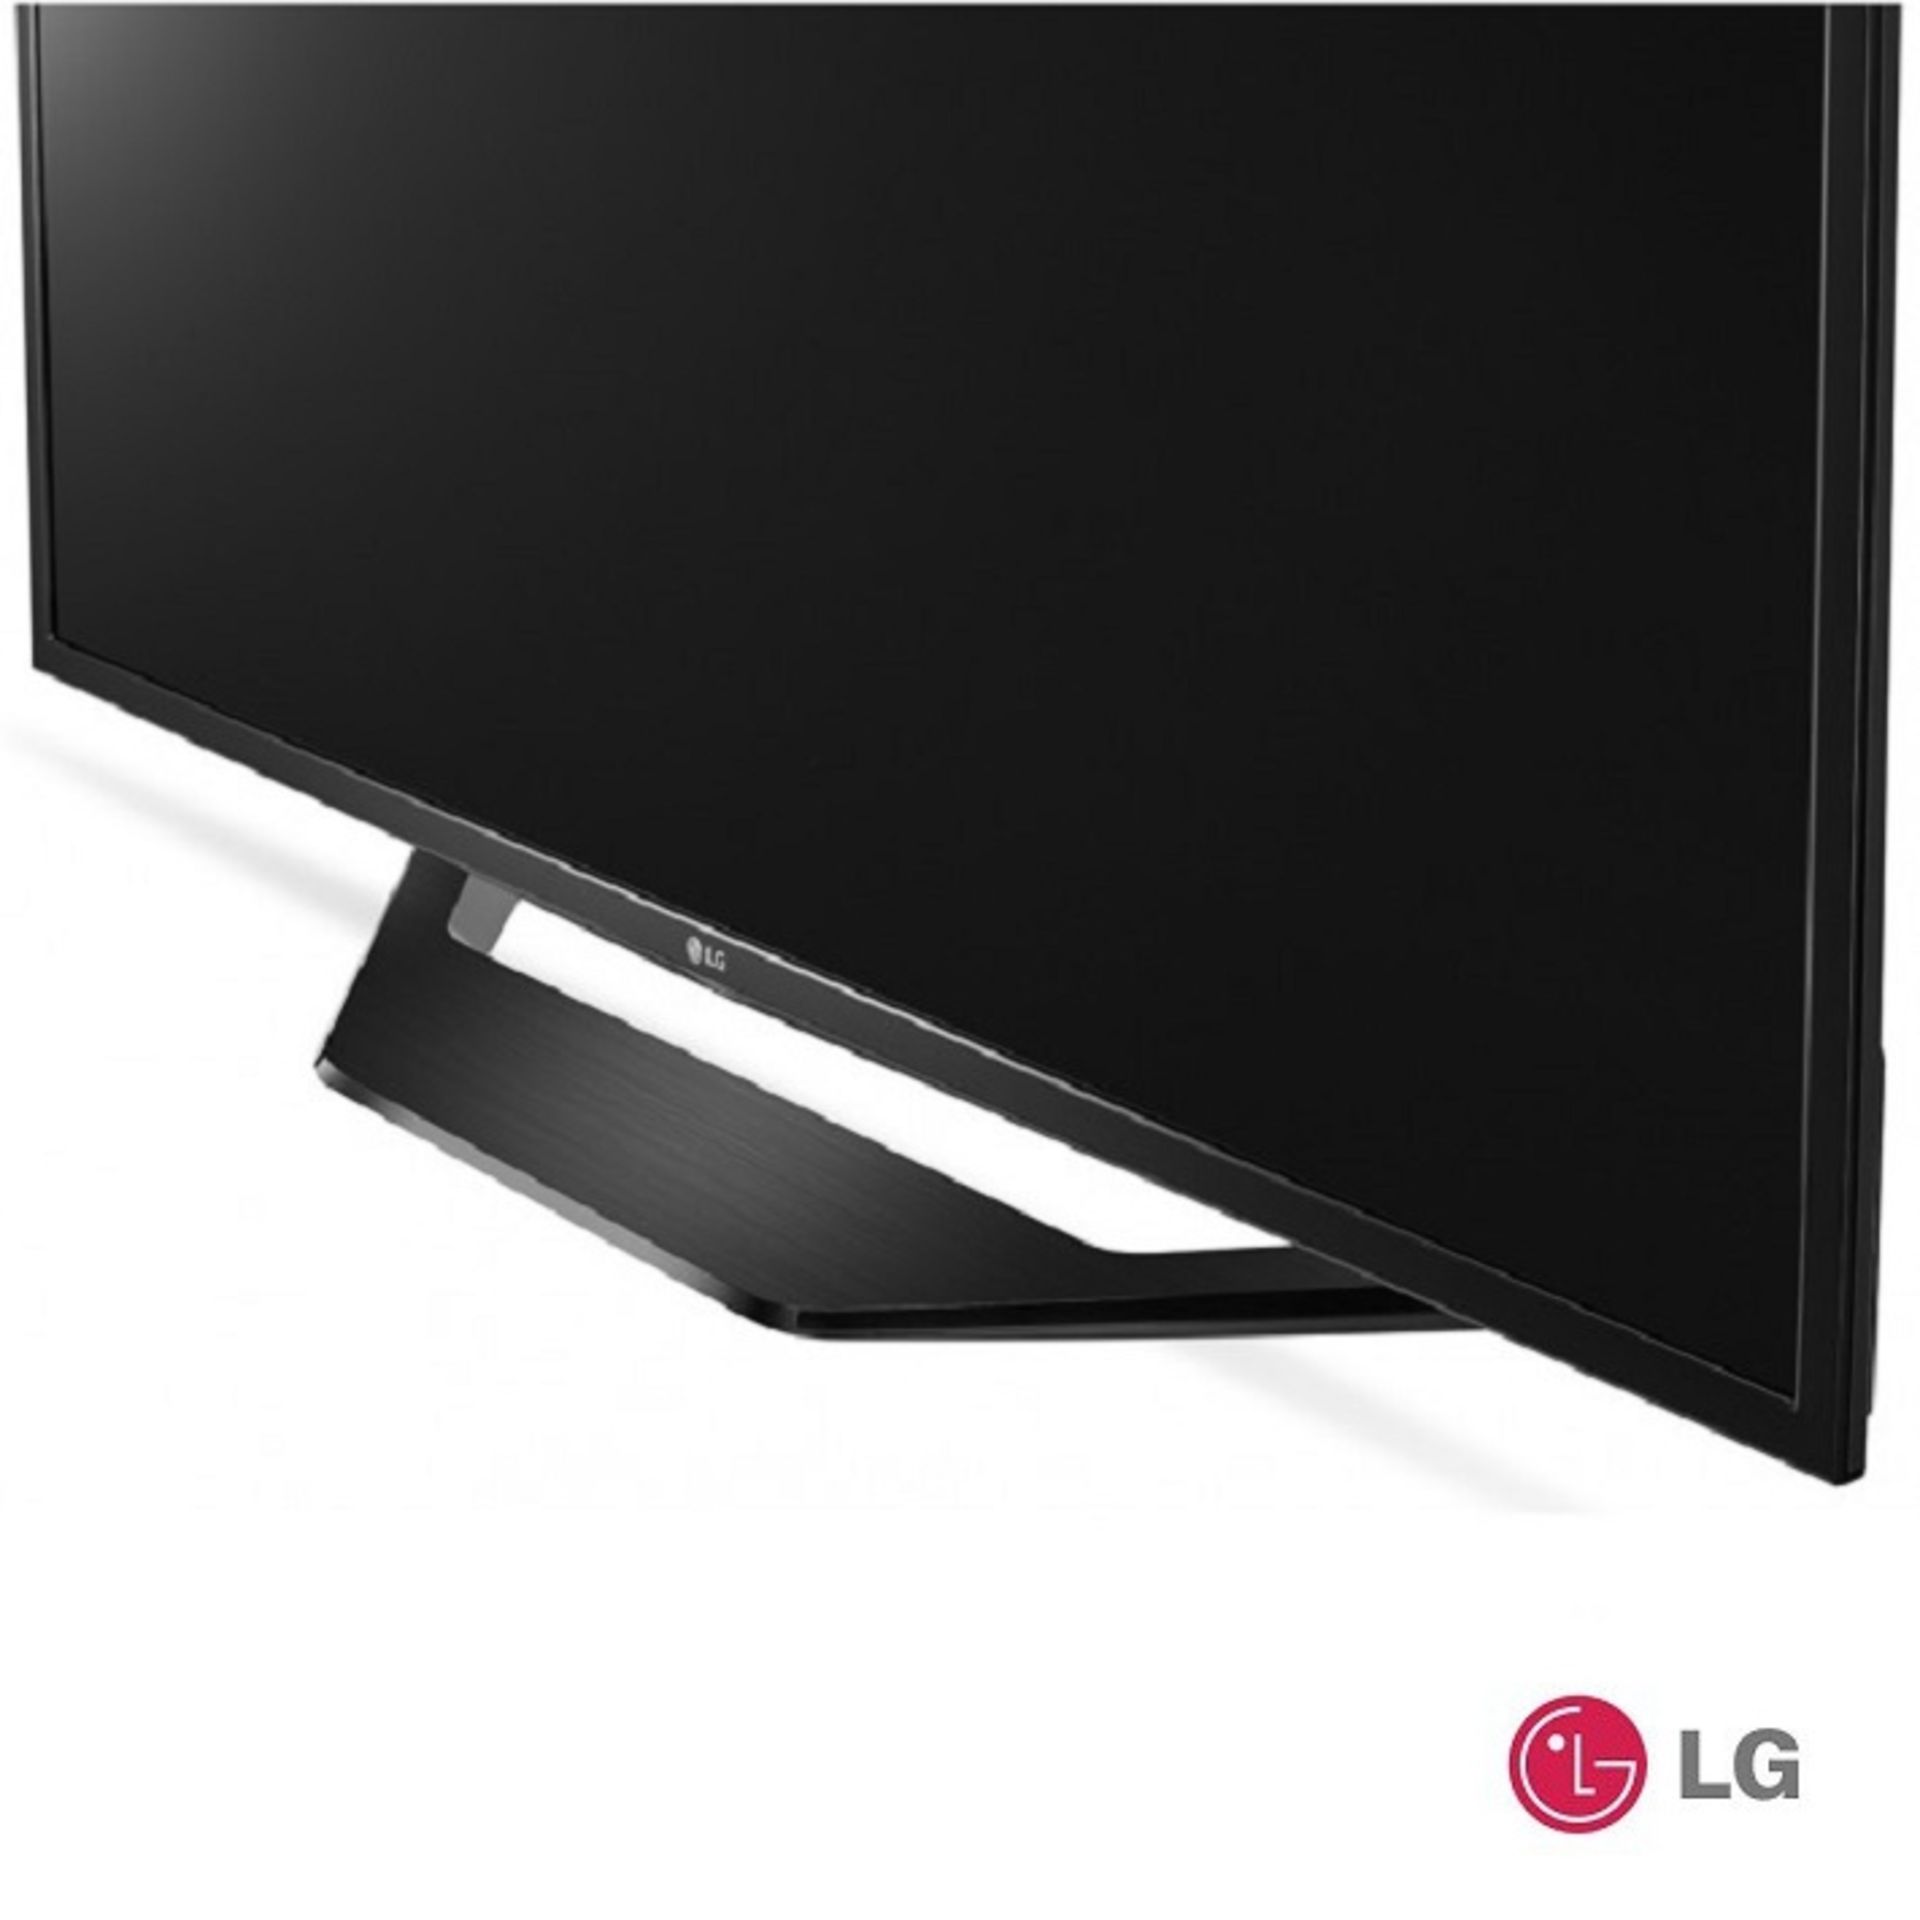 V Grade A LG 43" 4K Ultra HD Smart TV With HDR - Built In WiFi - WebOS Operating System - DLNA - Image 2 of 2